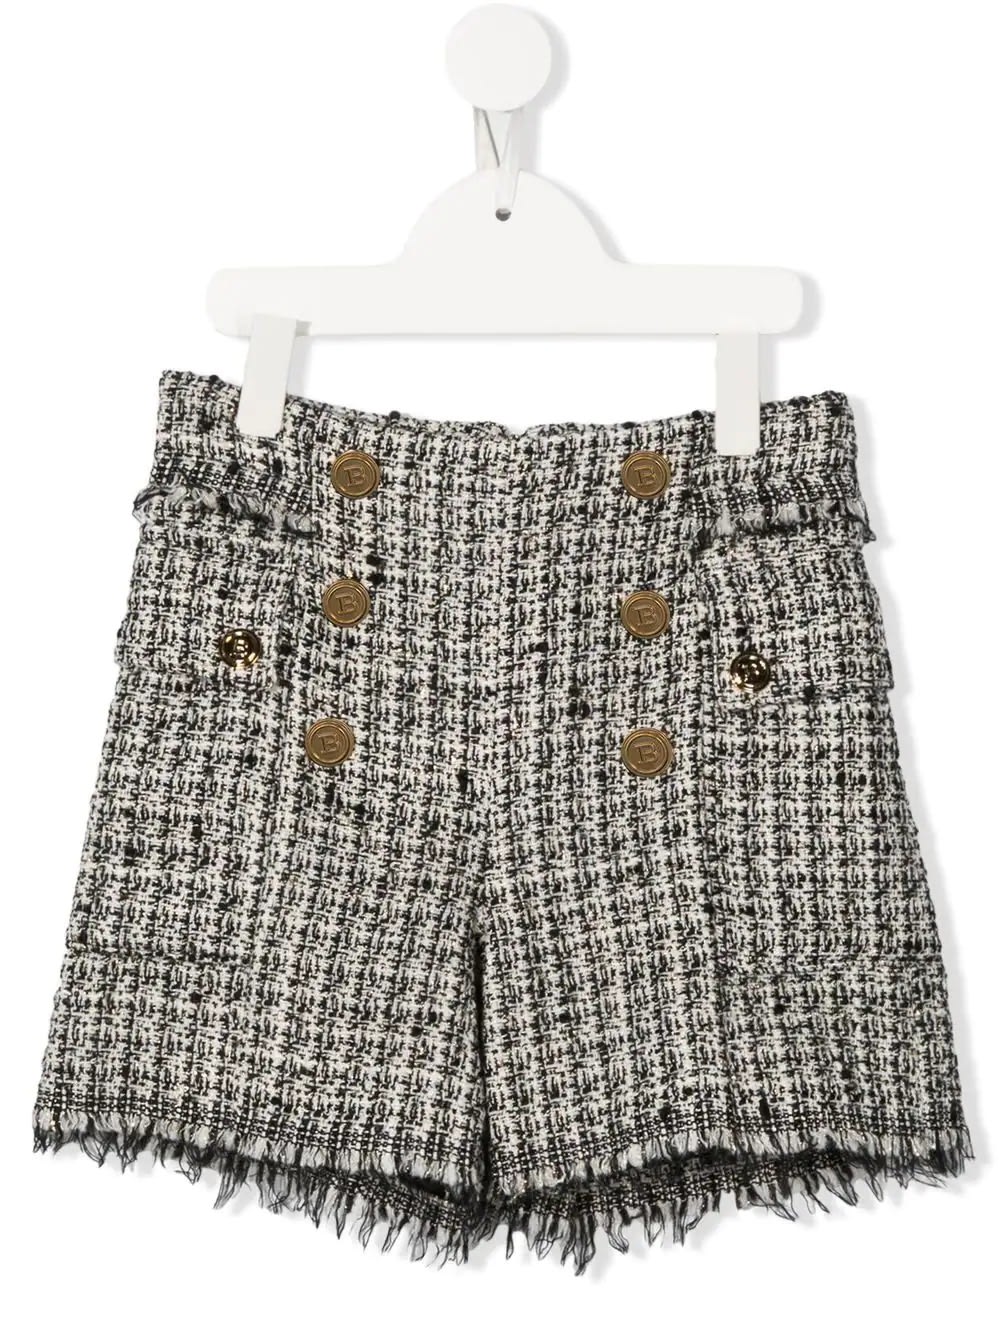 Balmain Black And Ivory Tweed Shorts With Buttons